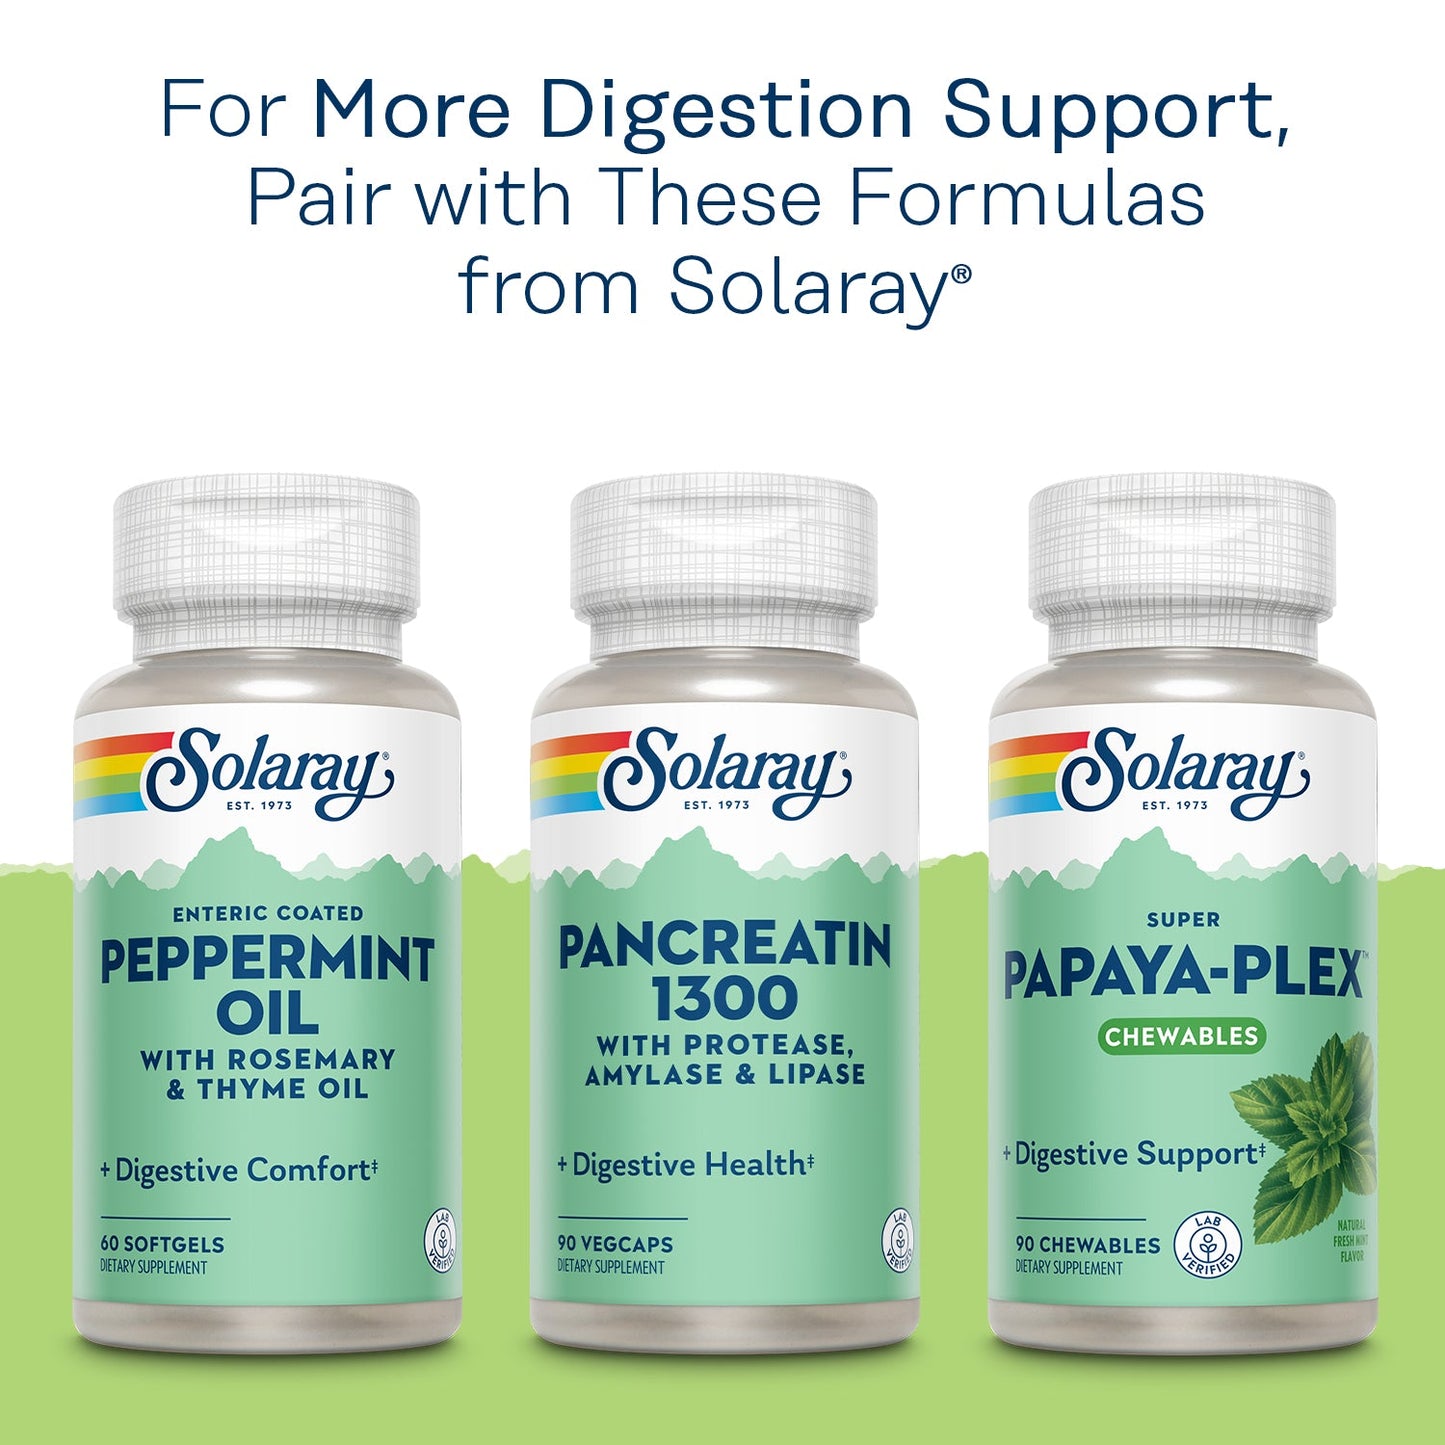 Solaray High Potency Betaine HCL with Pepsin 650 mg, Hydrochloric Acid Formula for Healthy Digestion Support, Lab Verified, 250 VegCaps (100 Servings, 100 Veg Caps)